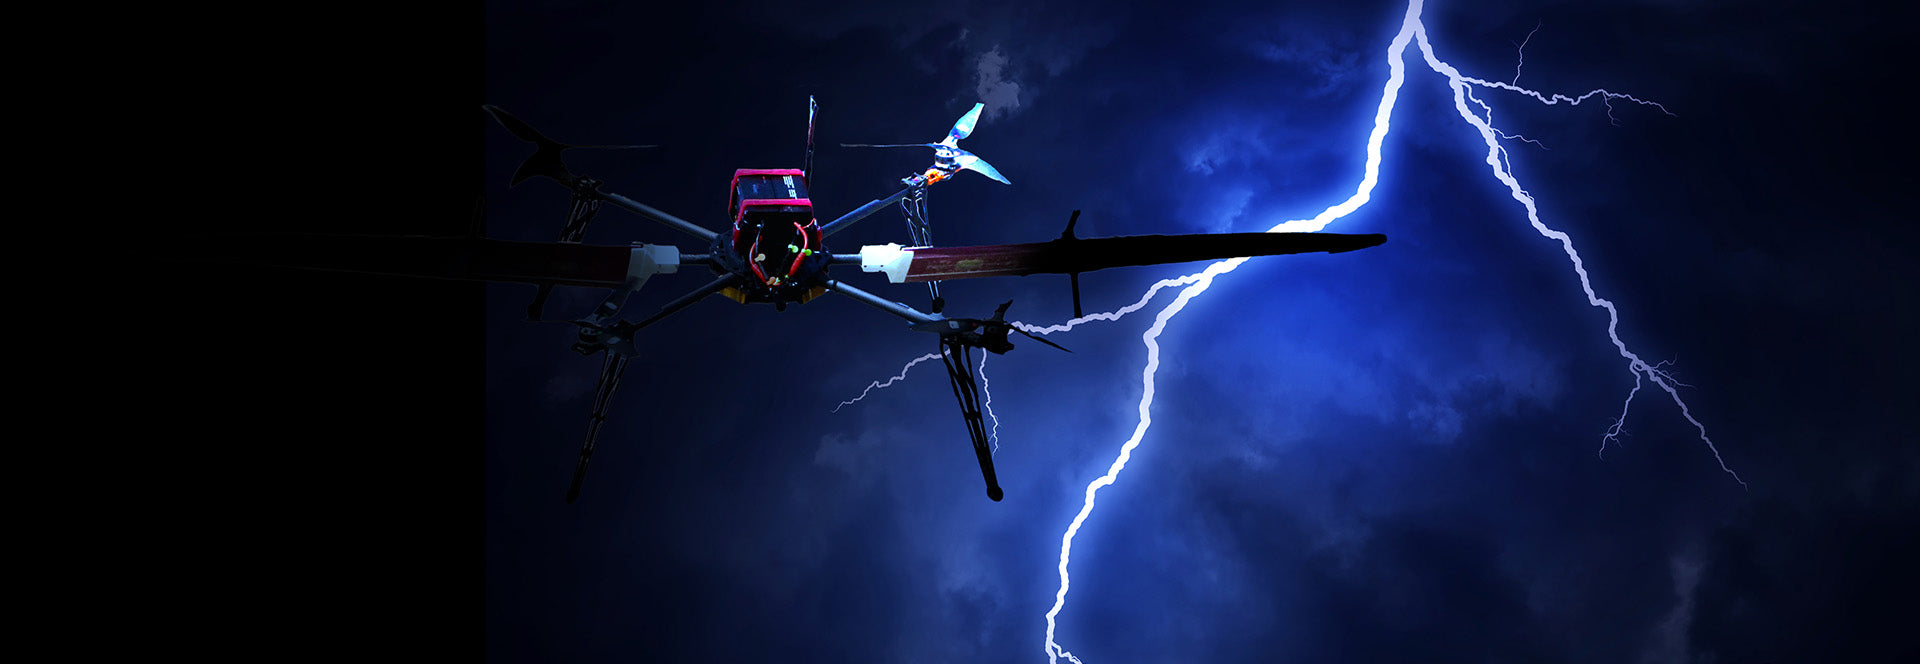 wave aerospace drone in storm